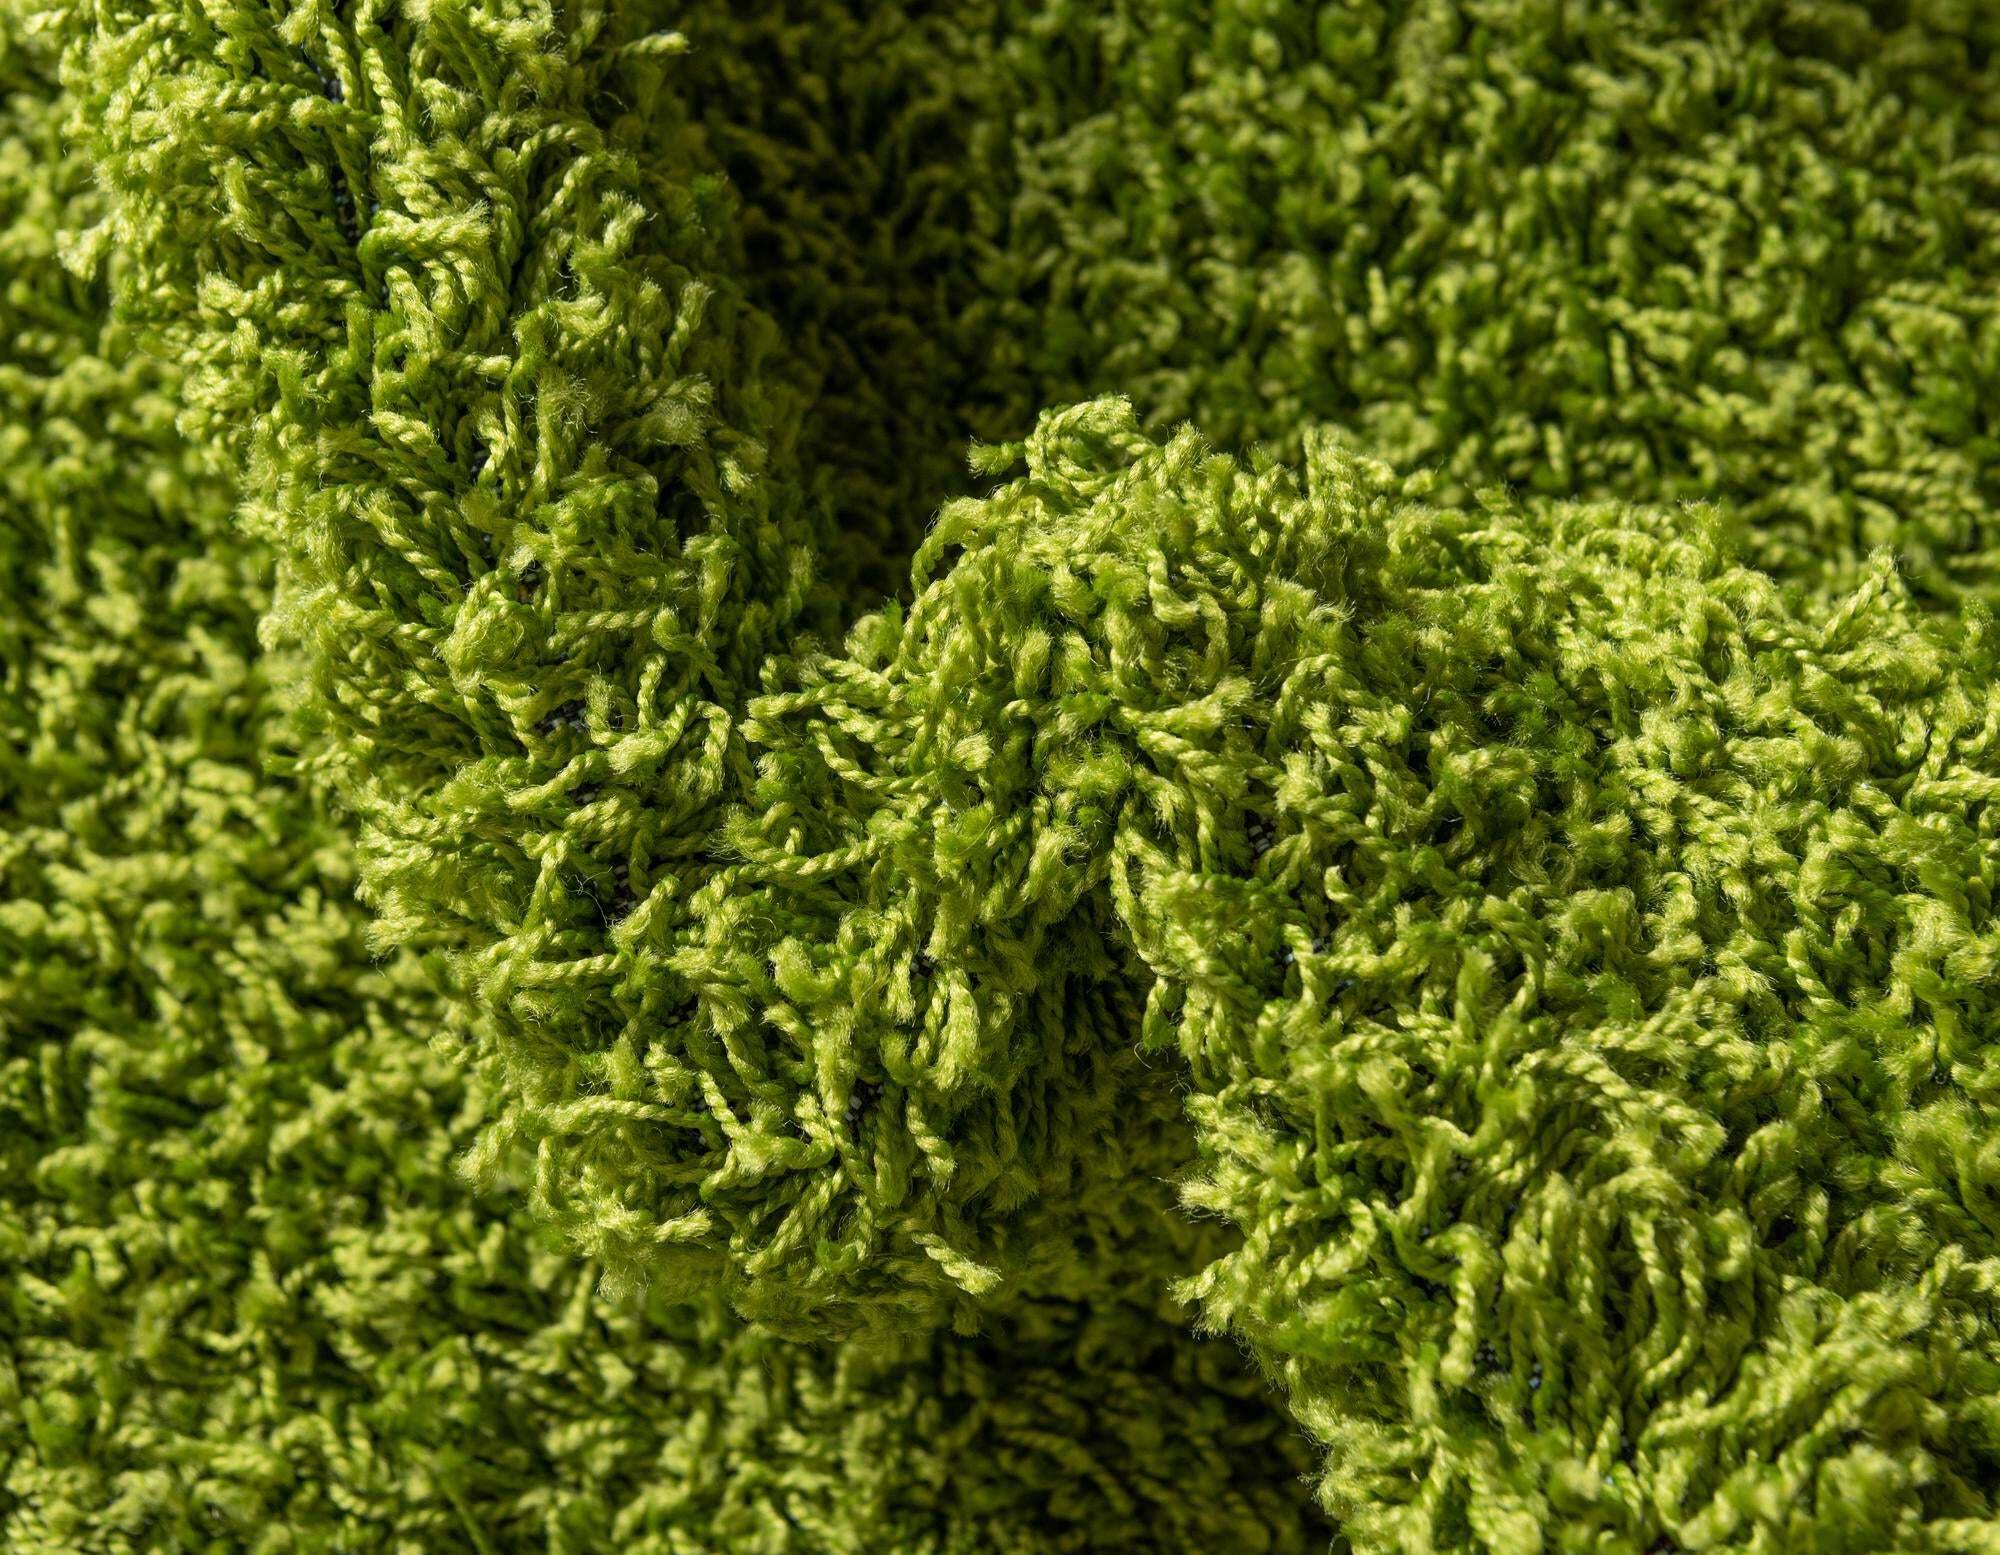 Unique Loom Indoor Rugs - Solid Shag Solid Oval 8x10 Oval Rug Grass Green